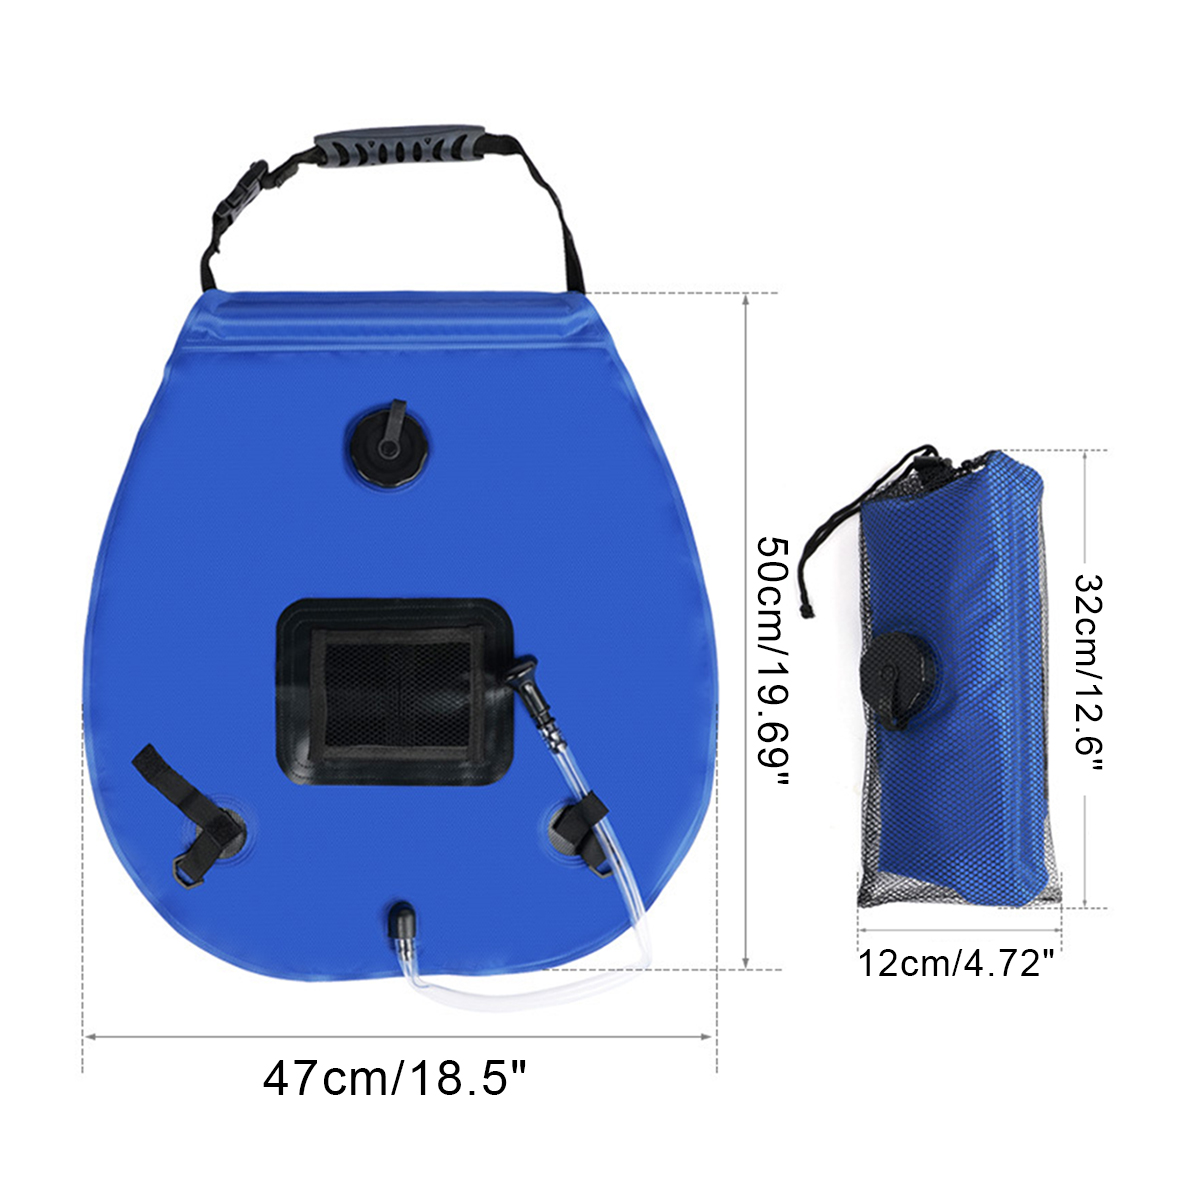 20L-Portable-Solar-Heated-Shower-Water-Bathing-Bag-Outdoor-Camping-Hiking-Water-Bag-With-Temperature-1790788-11